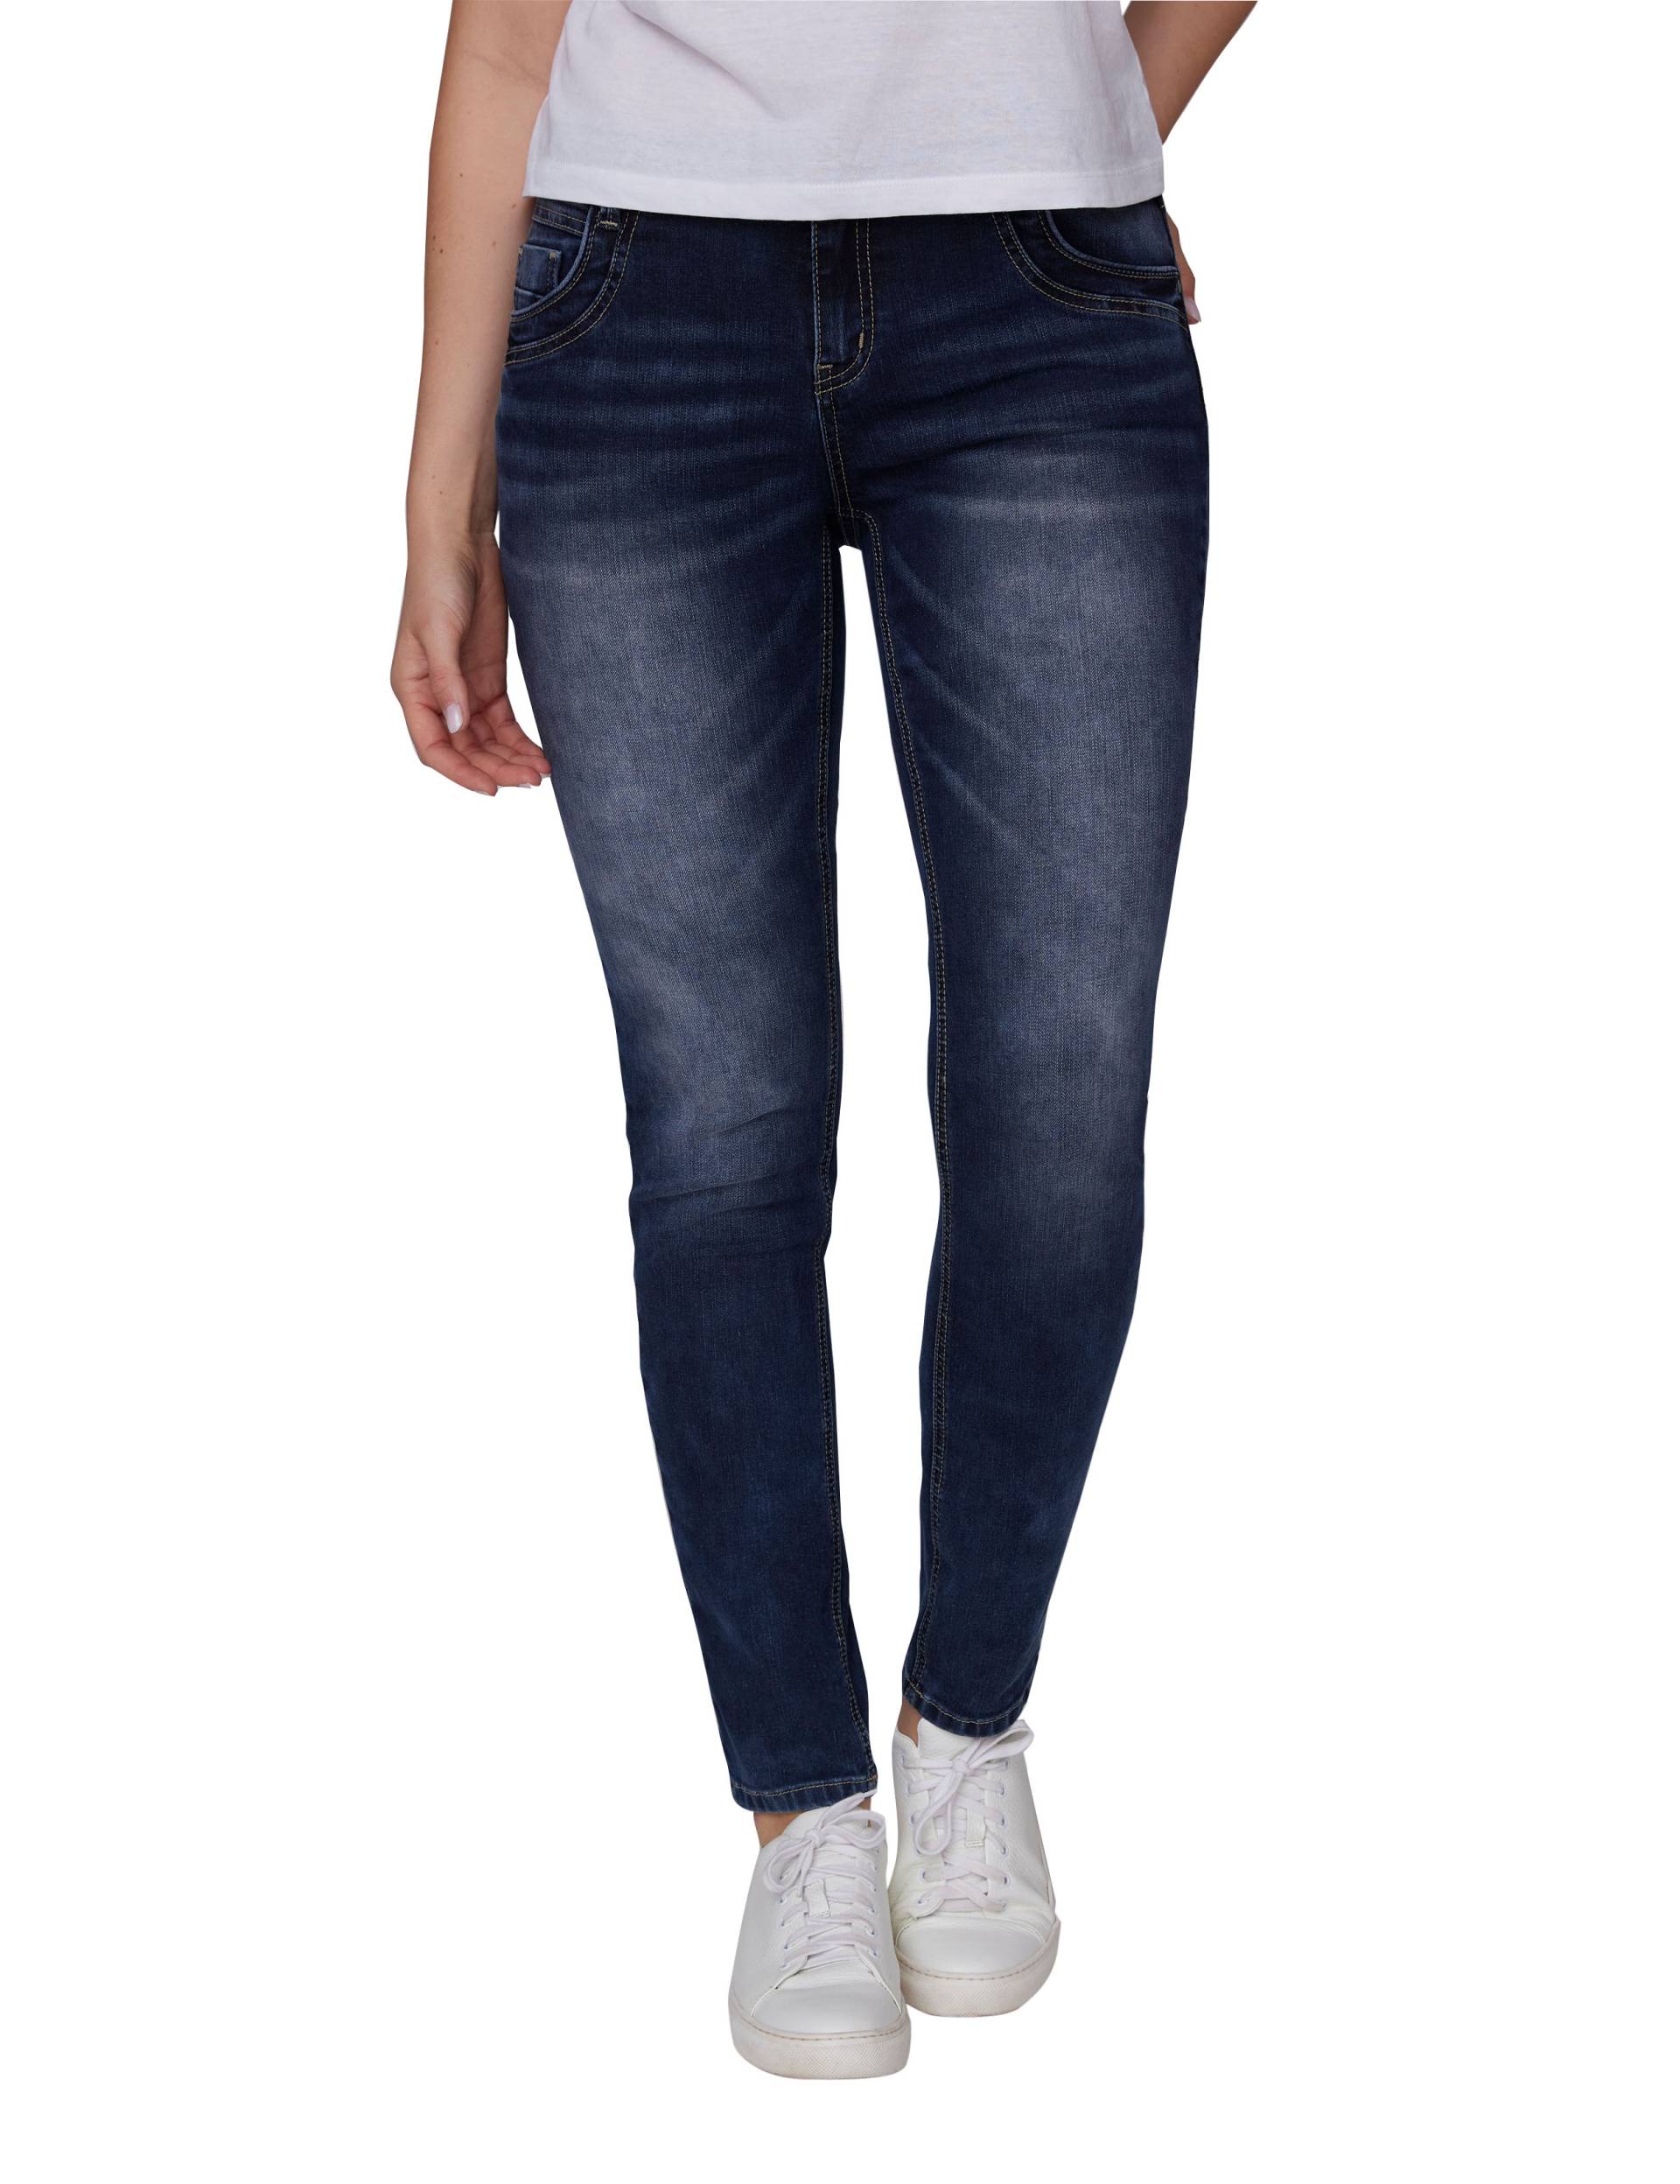 Modell CHRIS: Skinny Fit Jeans von Jeans Fritz